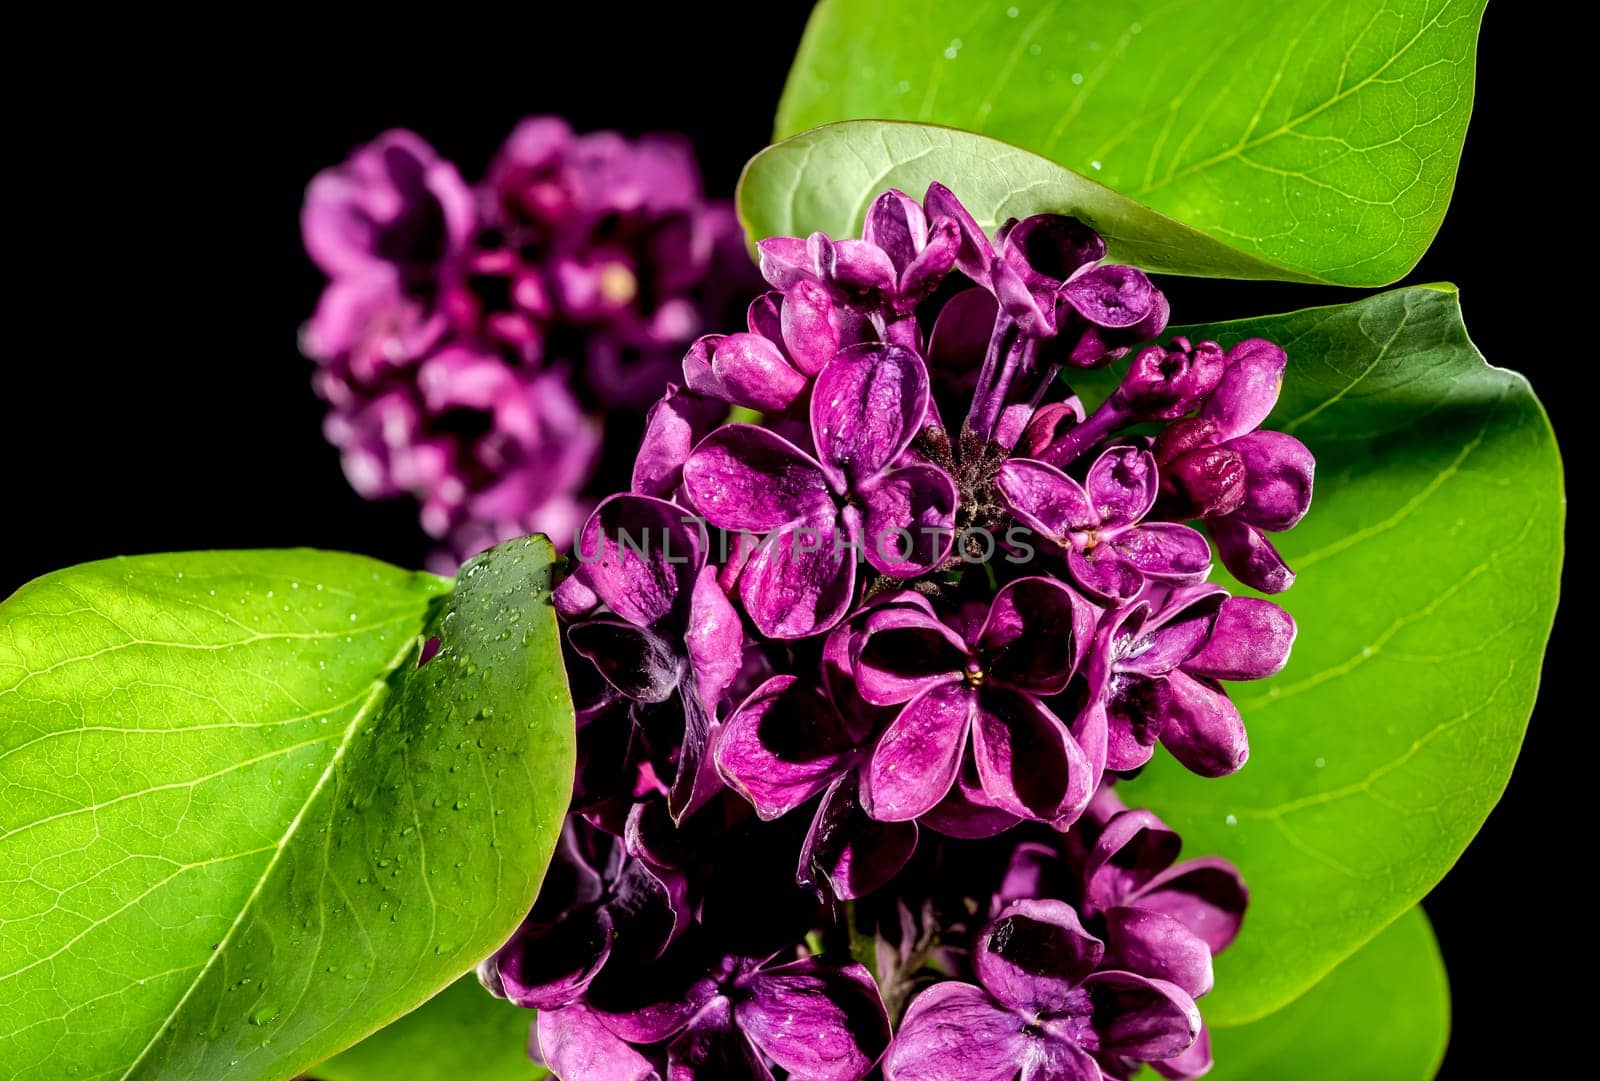 Beautiful blooming dark purple lilac isolated on a black background. Flower head close-up.